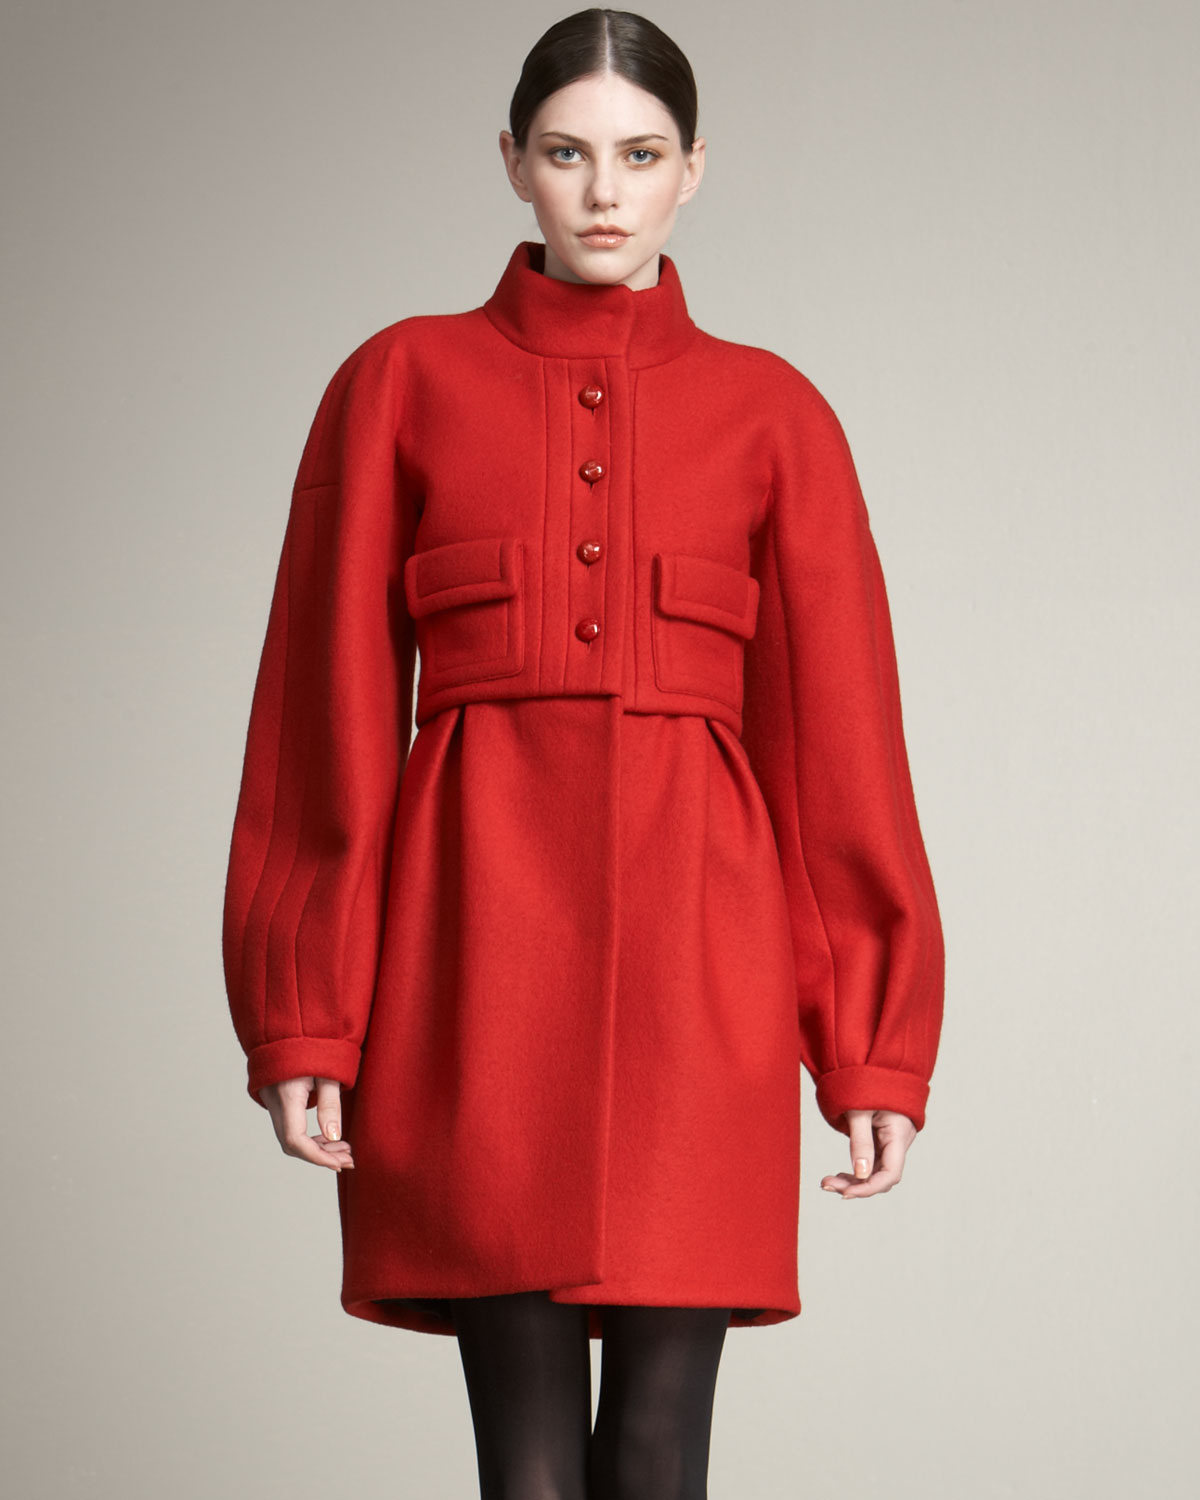 Lyst - Burberry prorsum Pleated Coat in Red